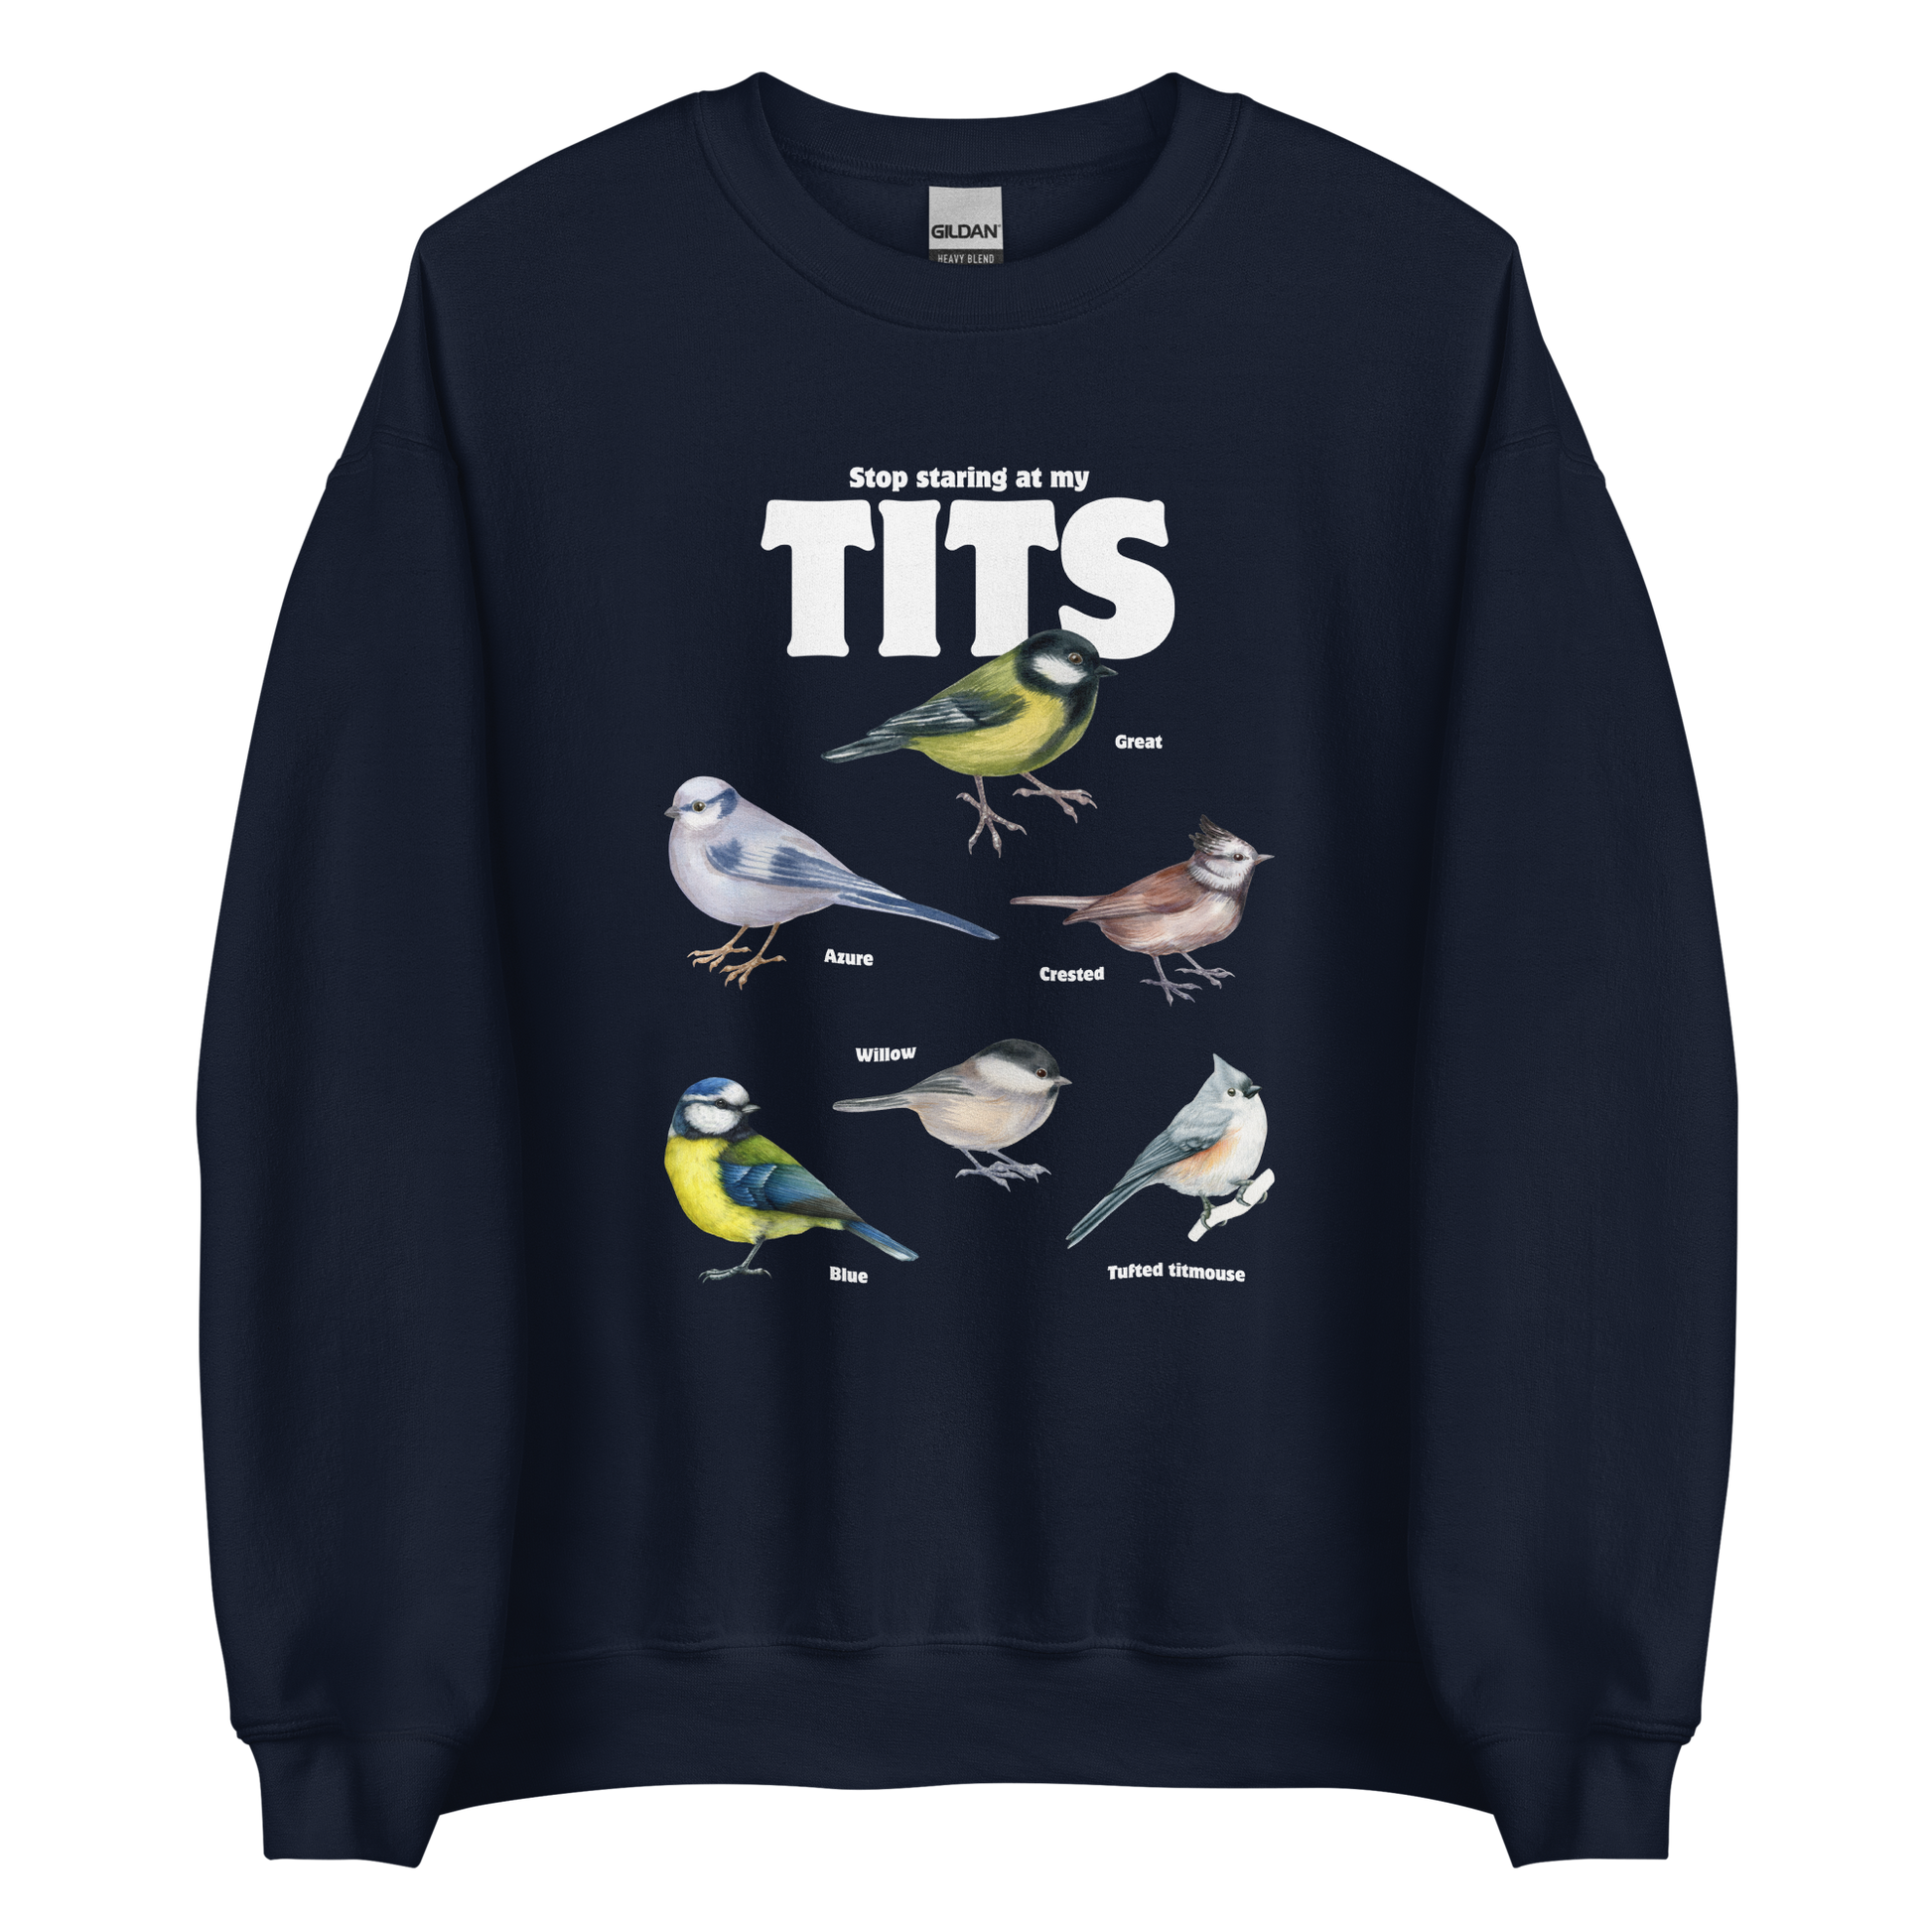 Navy Tit Sweatshirt featuring a funny Stop Staring At My Tits graphic on the chest - Funny Graphic Tit Bird Sweatshirts - Boozy Fox